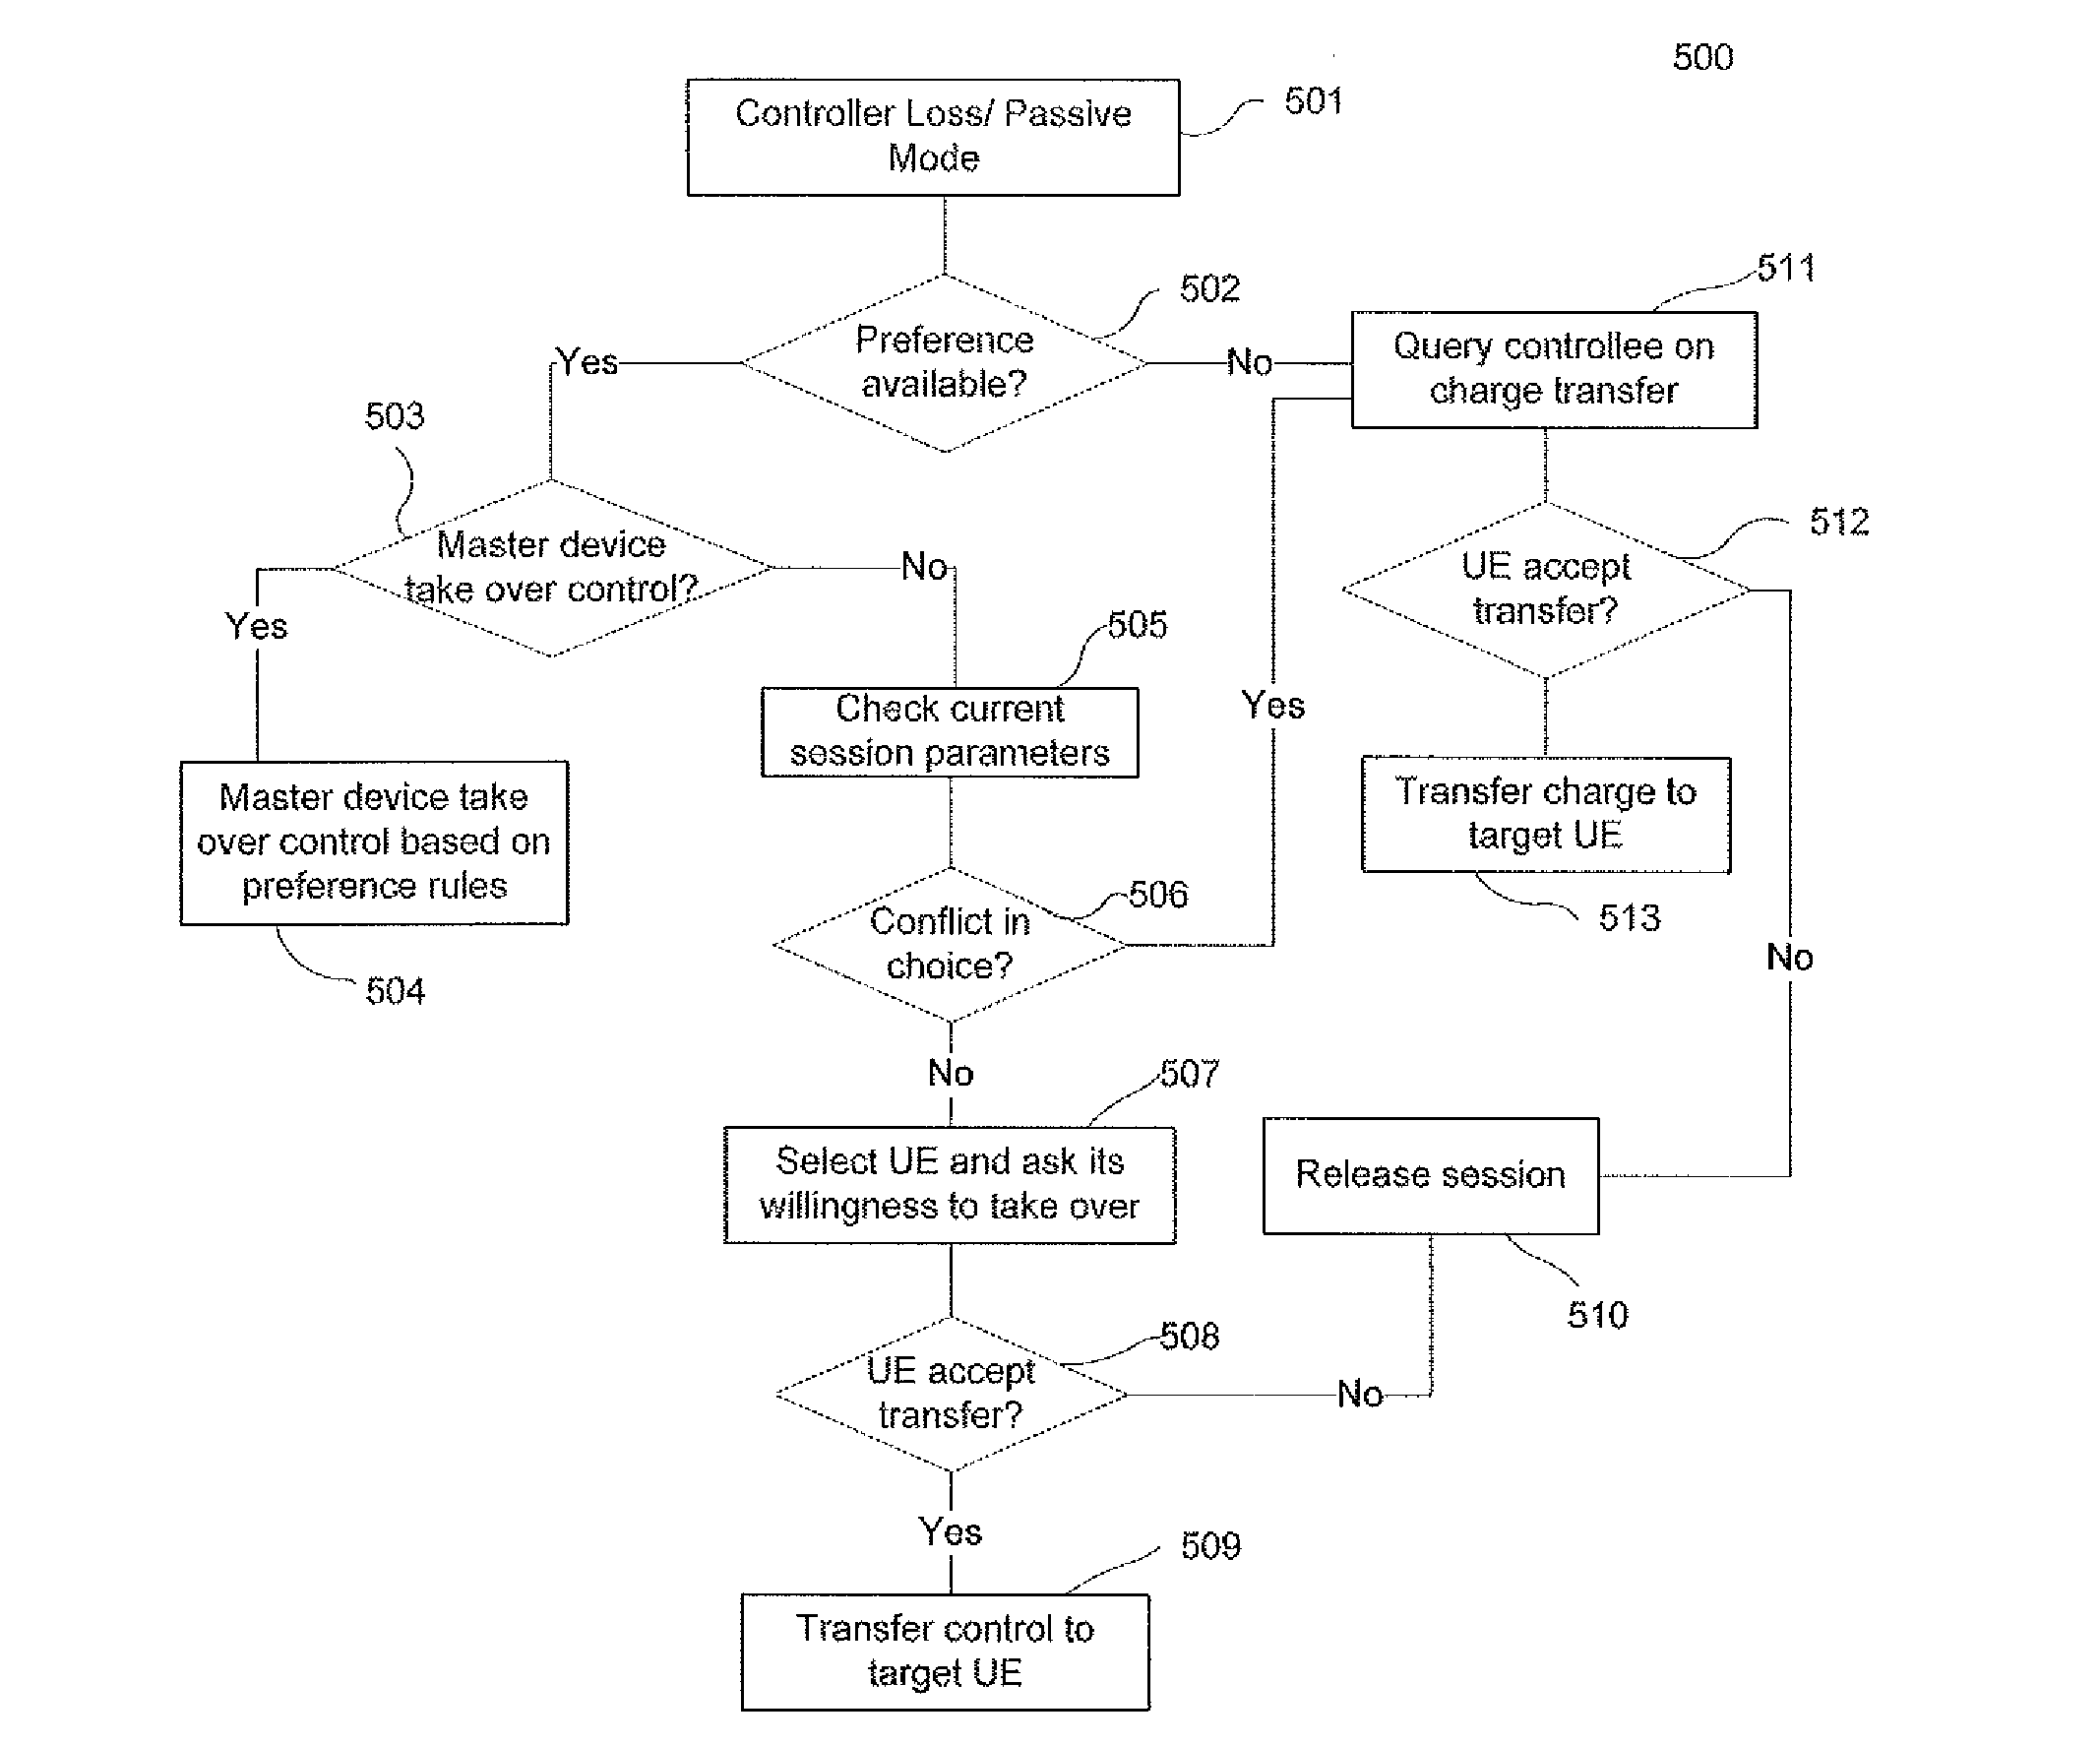 System and method to keep continuity of media flows for a collaborative session without constant controller(s) involvement